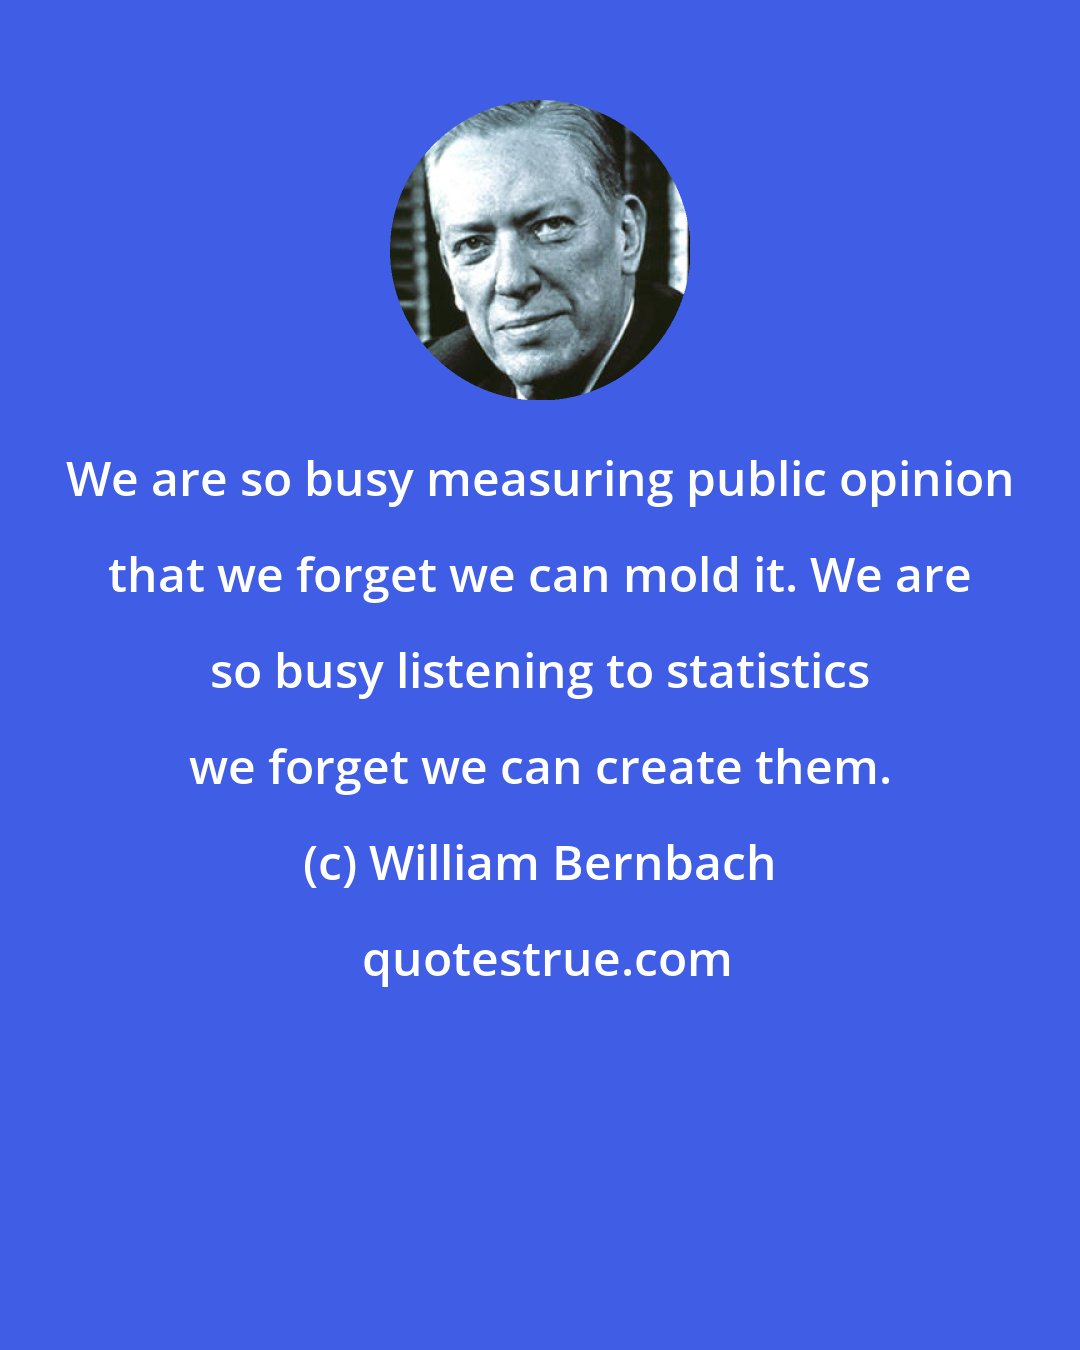 William Bernbach: We are so busy measuring public opinion that we forget we can mold it. We are so busy listening to statistics we forget we can create them.